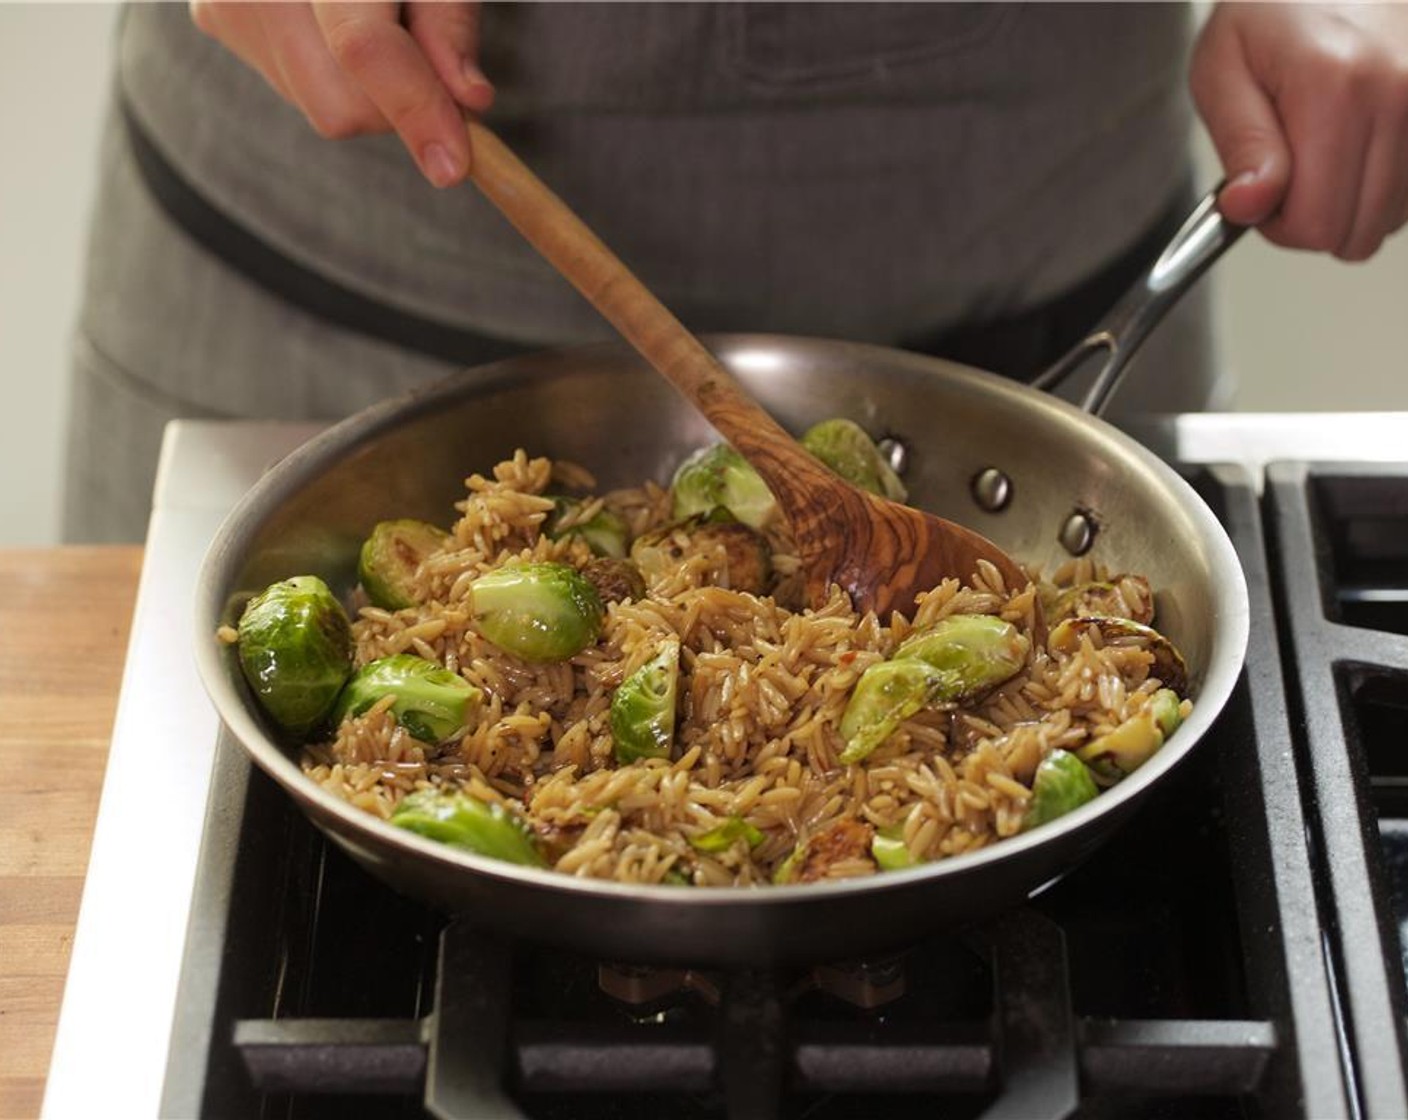 step 11 Remove from heat and add the brussels sprouts to the saucepan with the orzo. Stir to combine and keep warm.